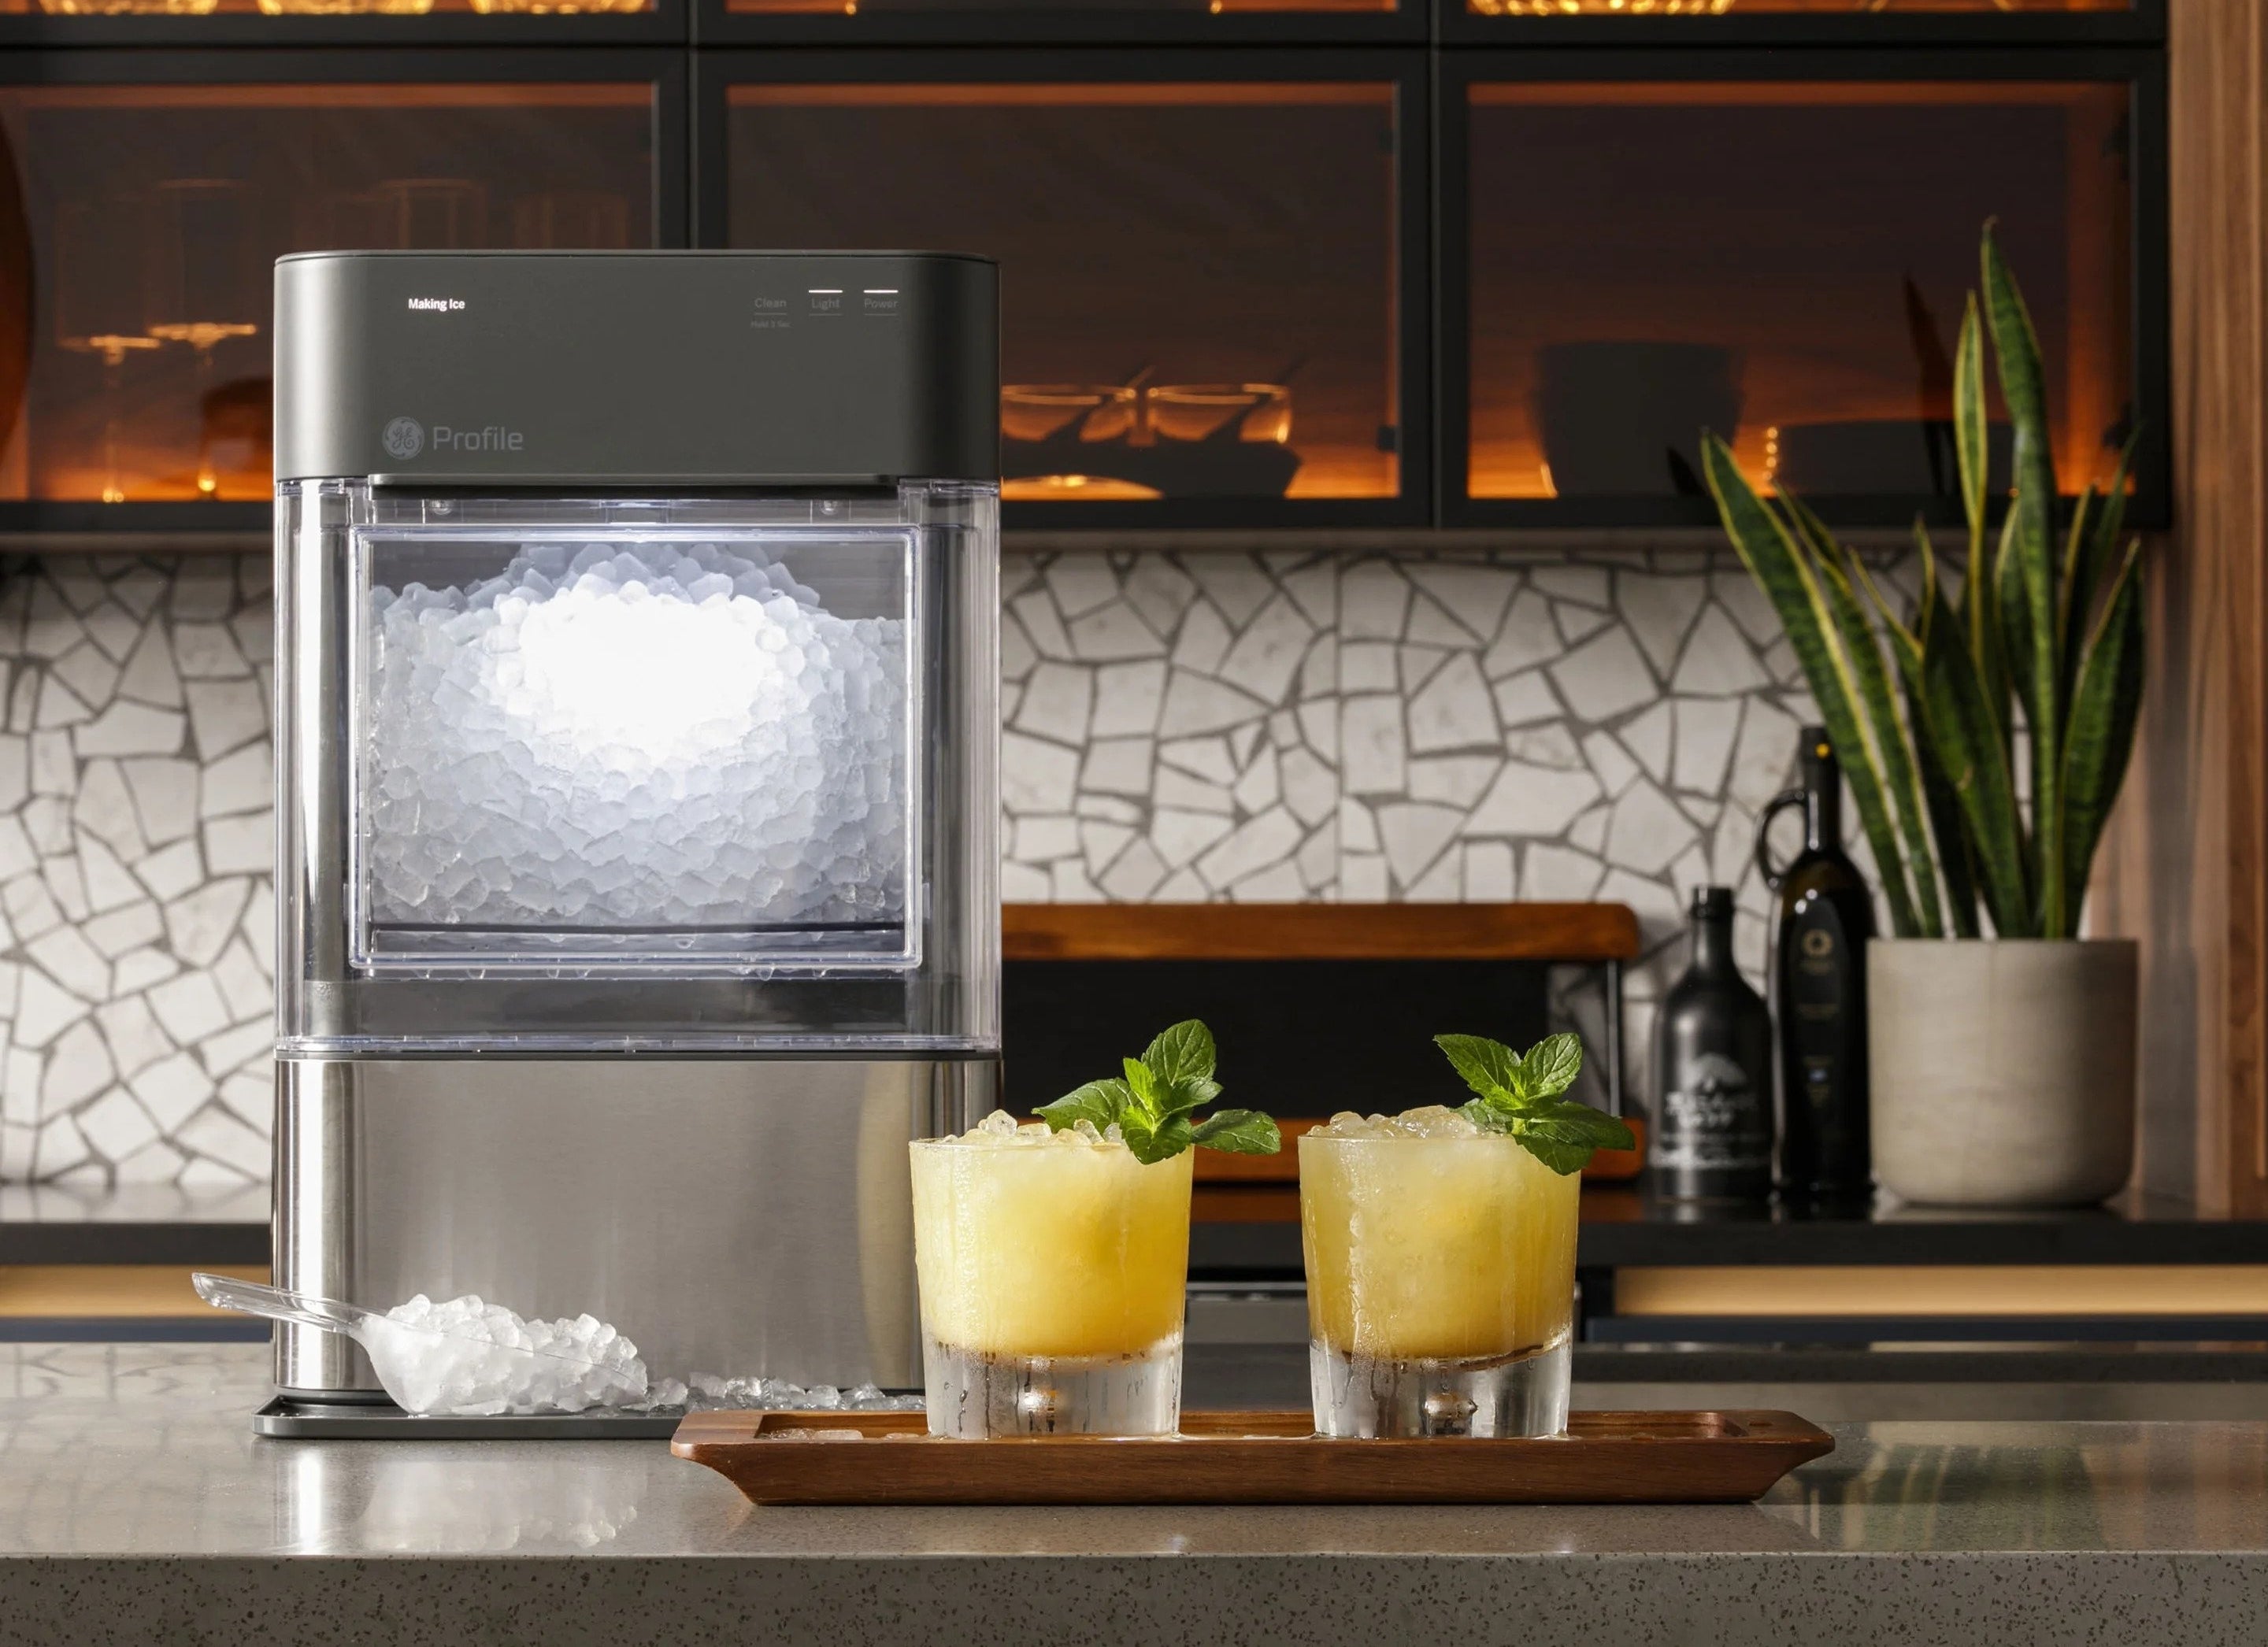 The ice maker with a transparent bin and stainless steel finish